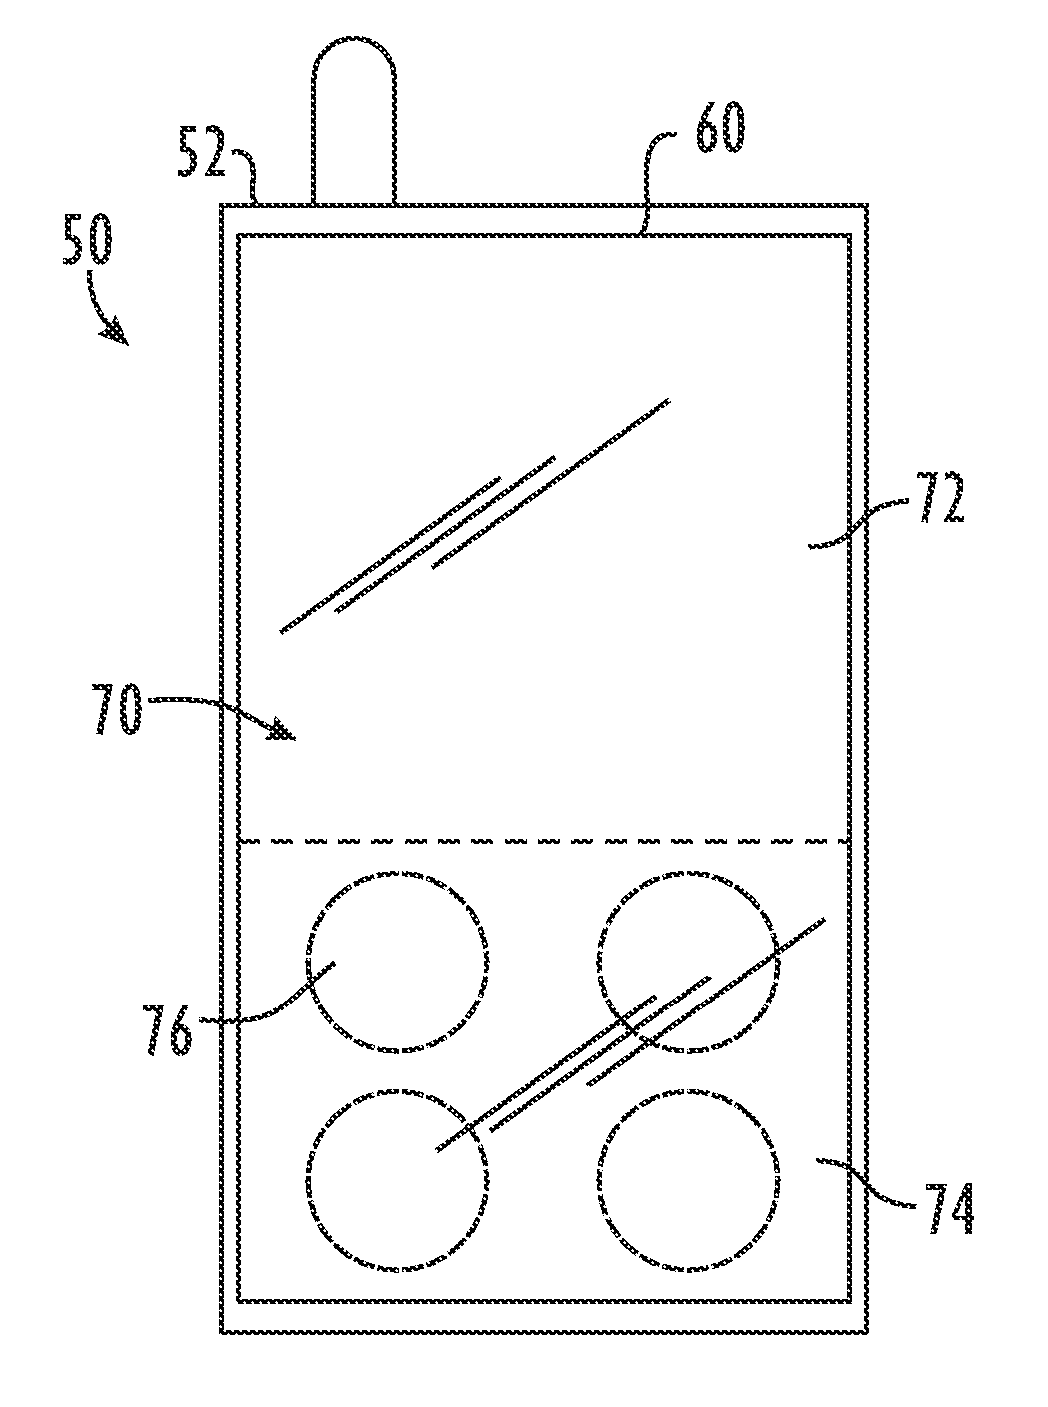 Electronic Device Having Display and Surrounding Touch Sensitive Bezel for User Interface and Control